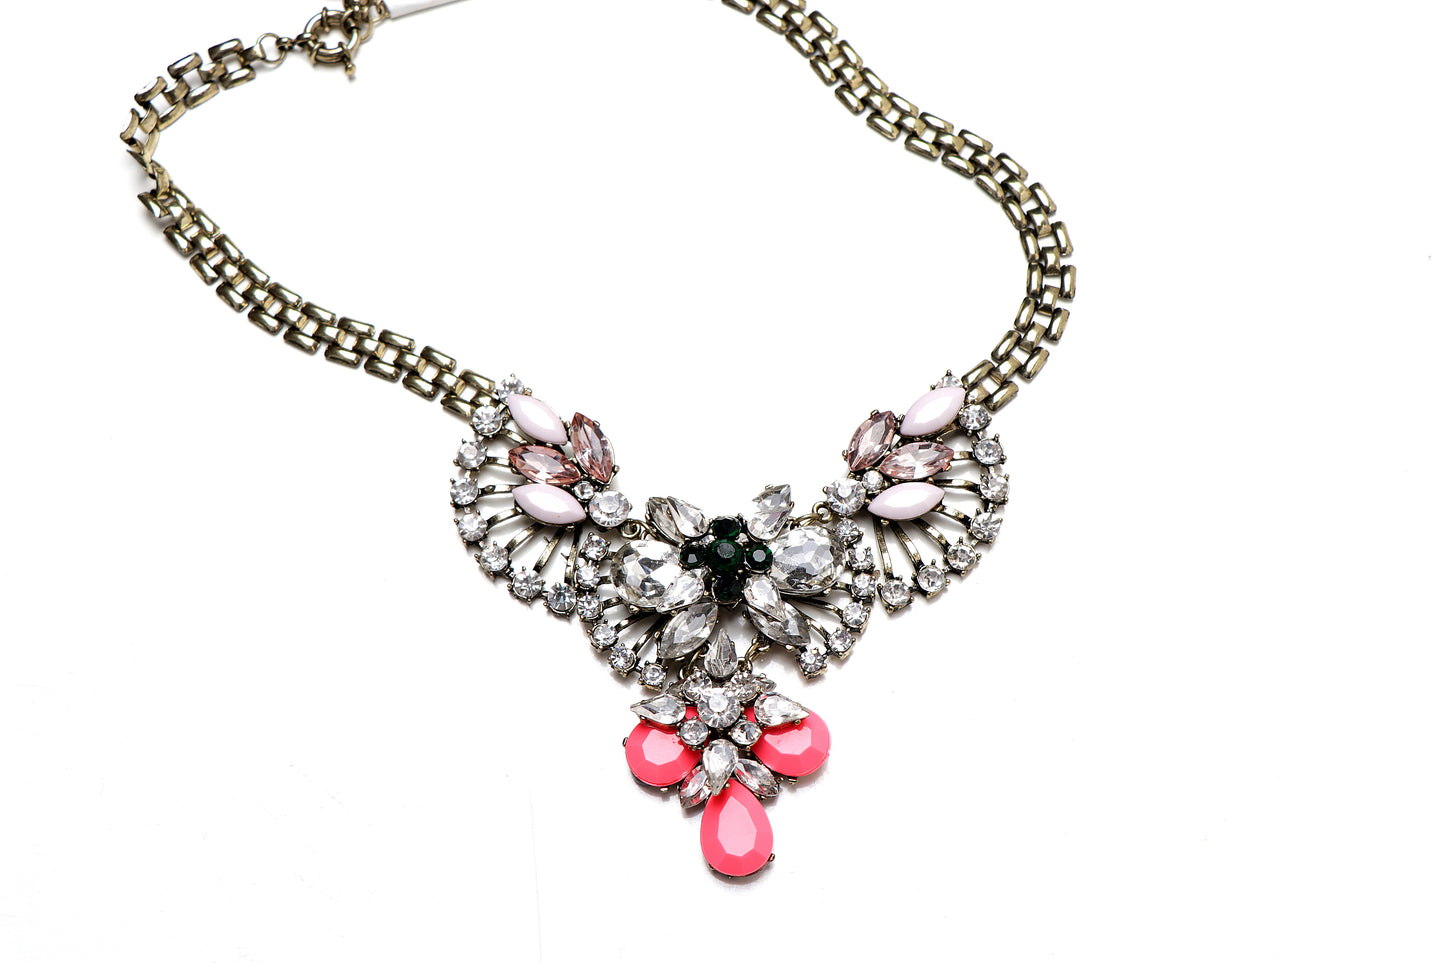 Necklace - Ruby